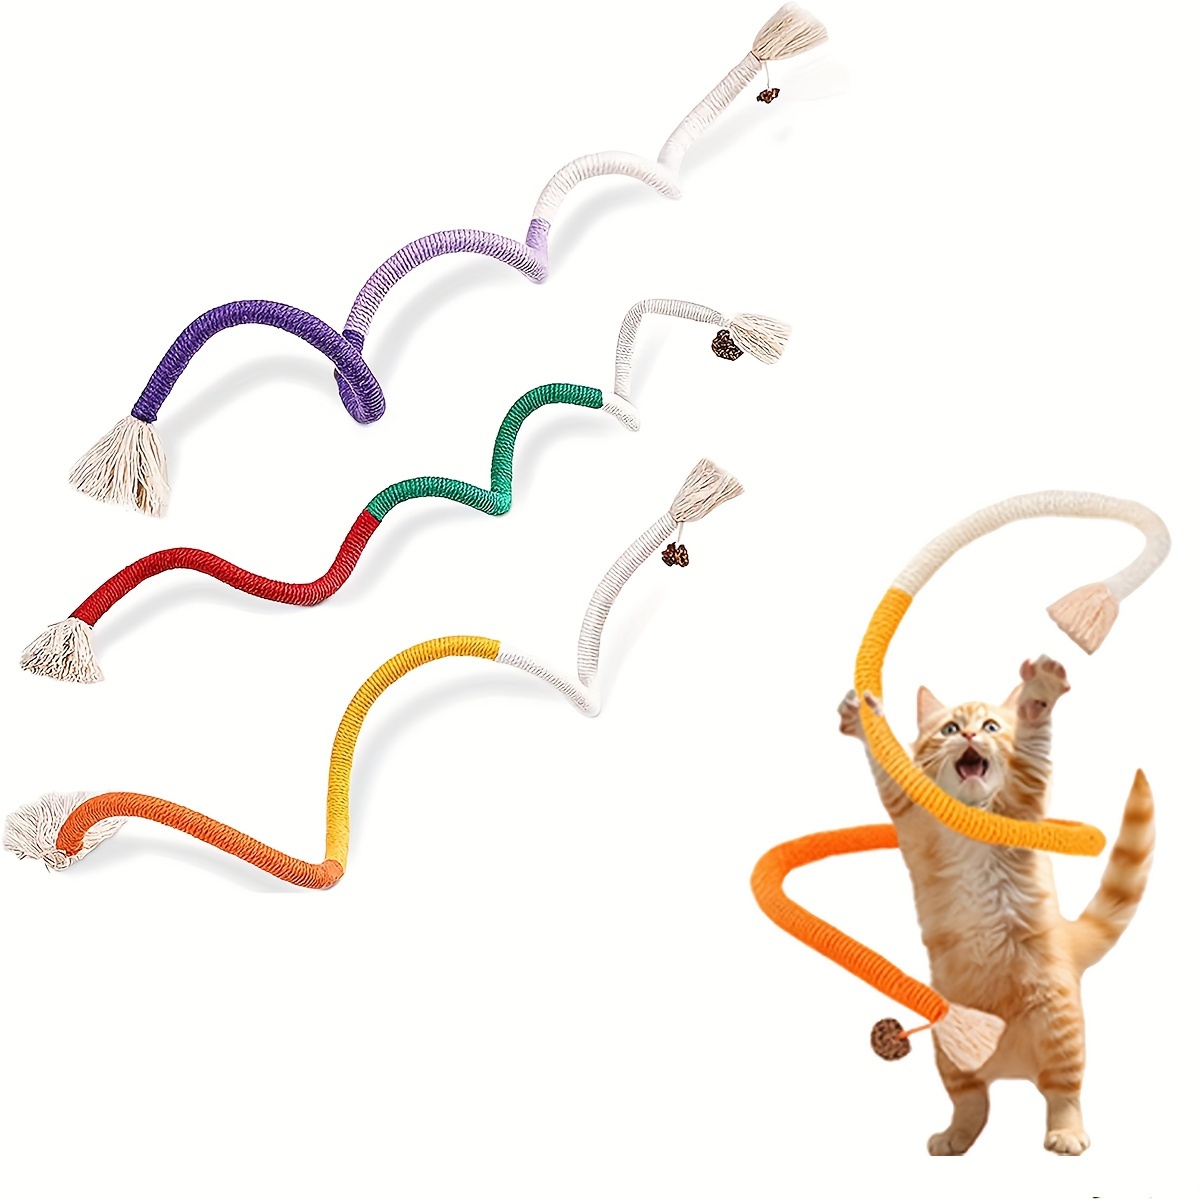 

3pcs Cotton Rope Cat Toys For Indoor Cats, Interactive Cat Rope Toys With Silvervine Fruit For Cats And Kittens, Handmade Pet Chew Toys For Teeth Cleaning